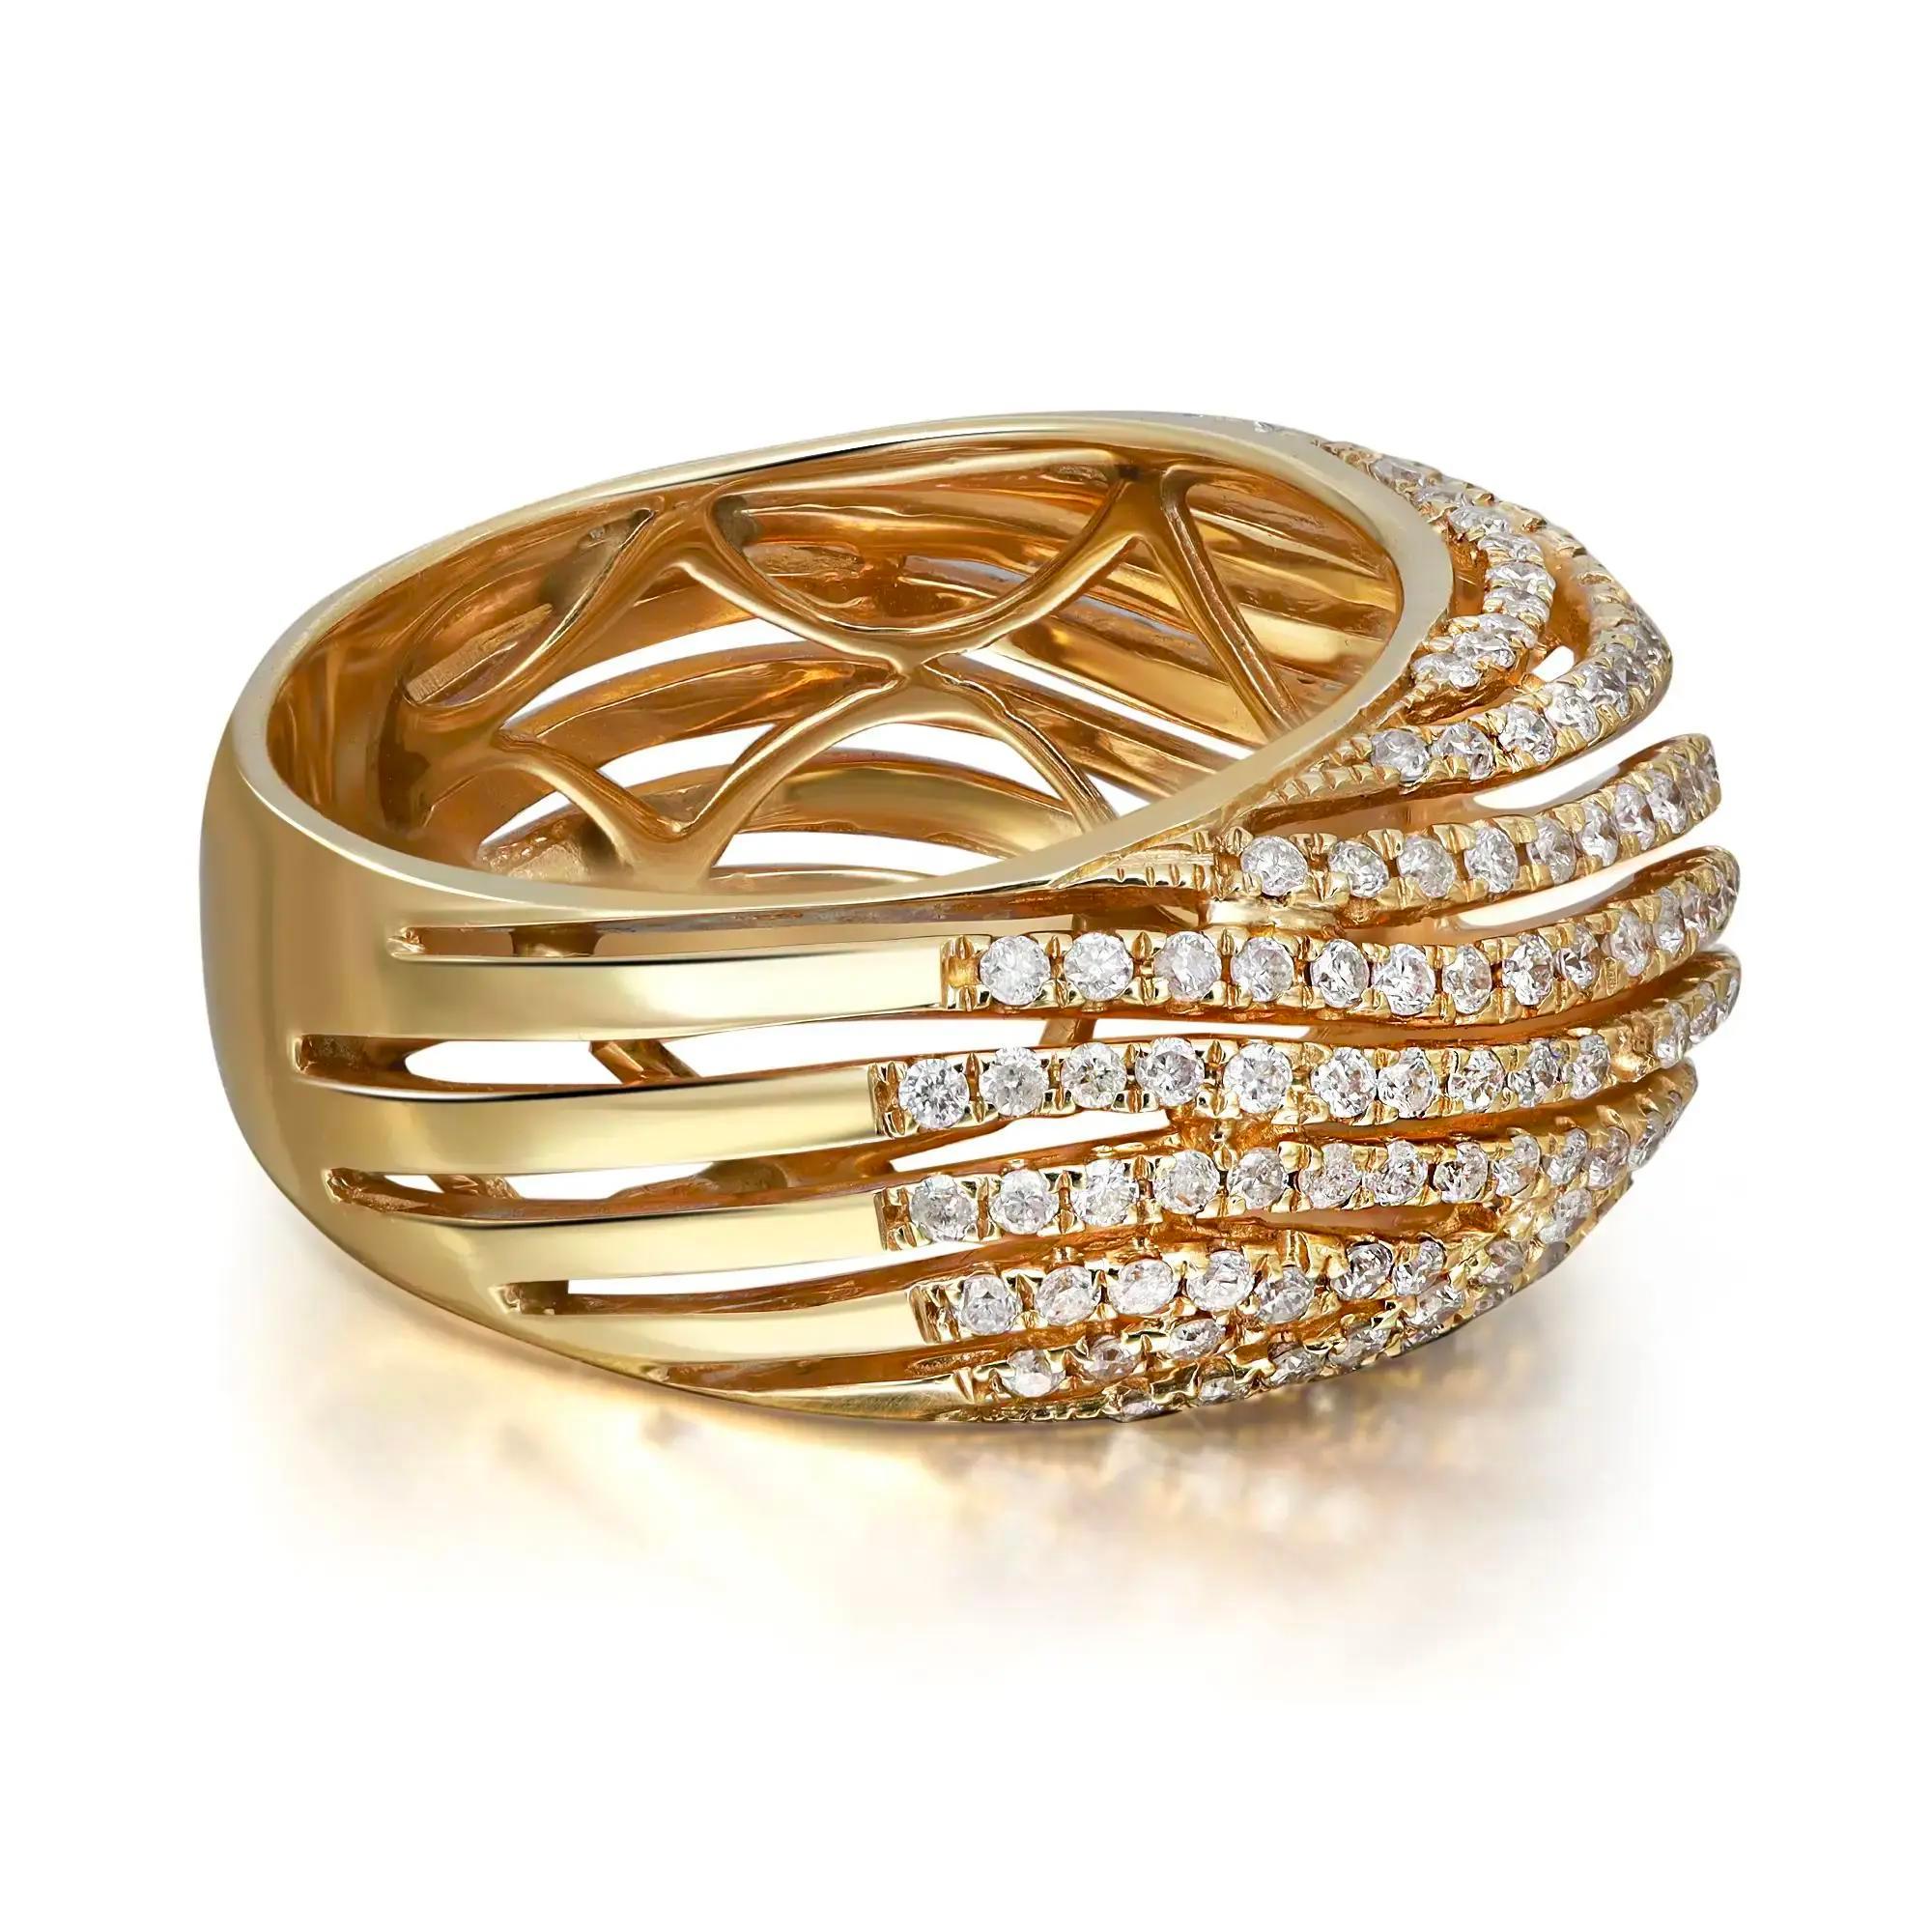 This elegant and classic diamond band ring is crafted in 14k yellow. Features multiple rows of prong set round brilliant cut diamonds set in a dome shaped shank weighing 1.07 carats. Diamond color I and SI clarity. Ring width: 10.8mm. Ring size: